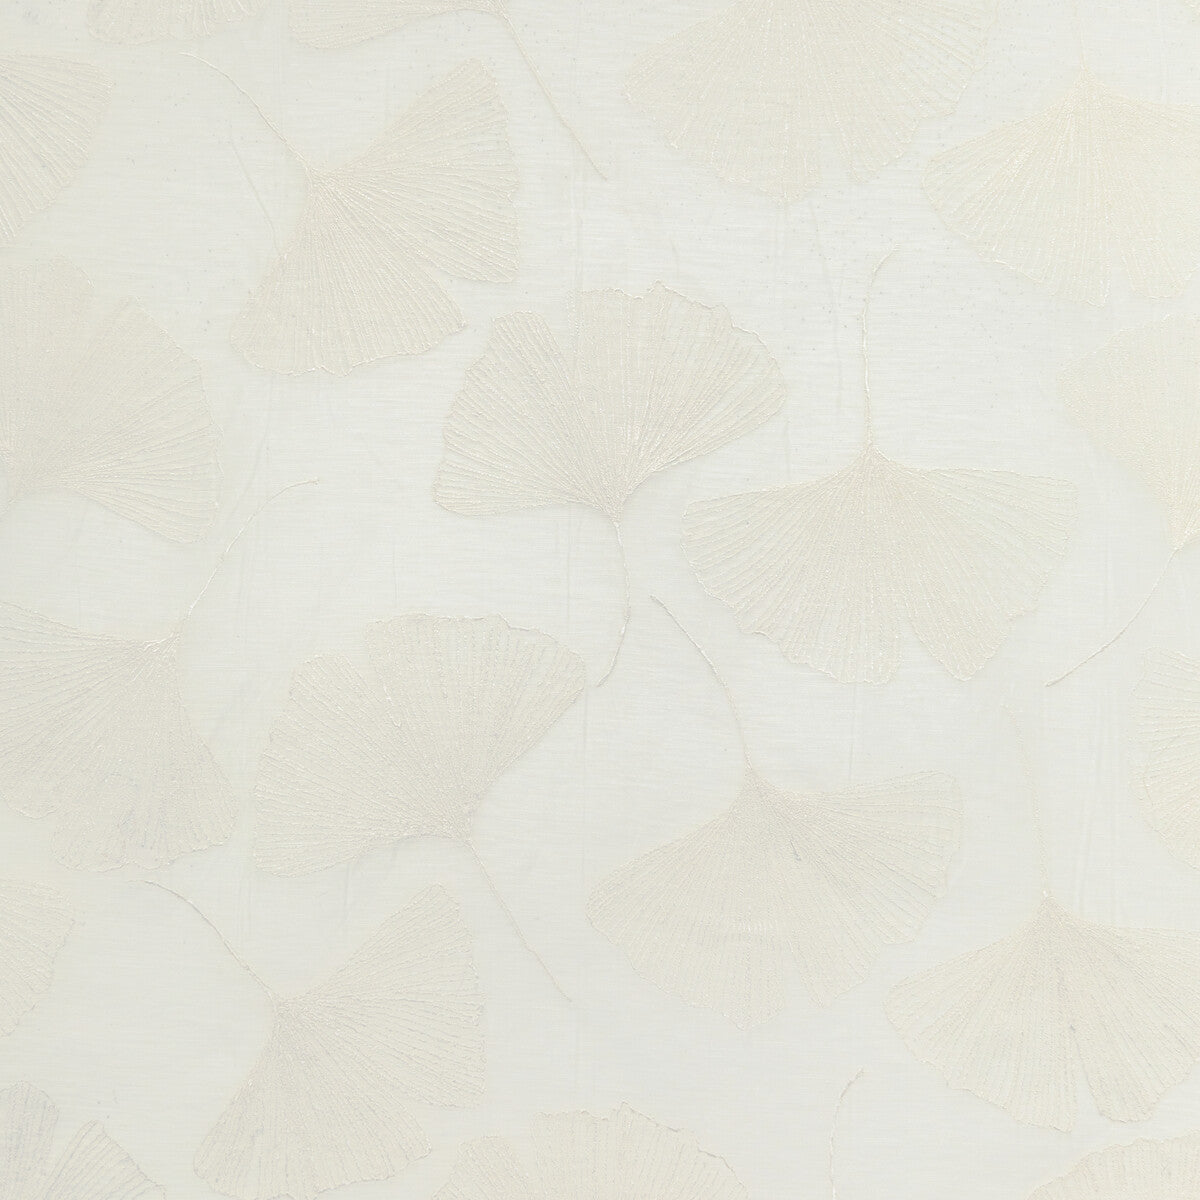 Gingko Leaf fabric in pearl color - pattern 4949.1116.0 - by Kravet Couture in the Modern Luxe Silk Luster collection